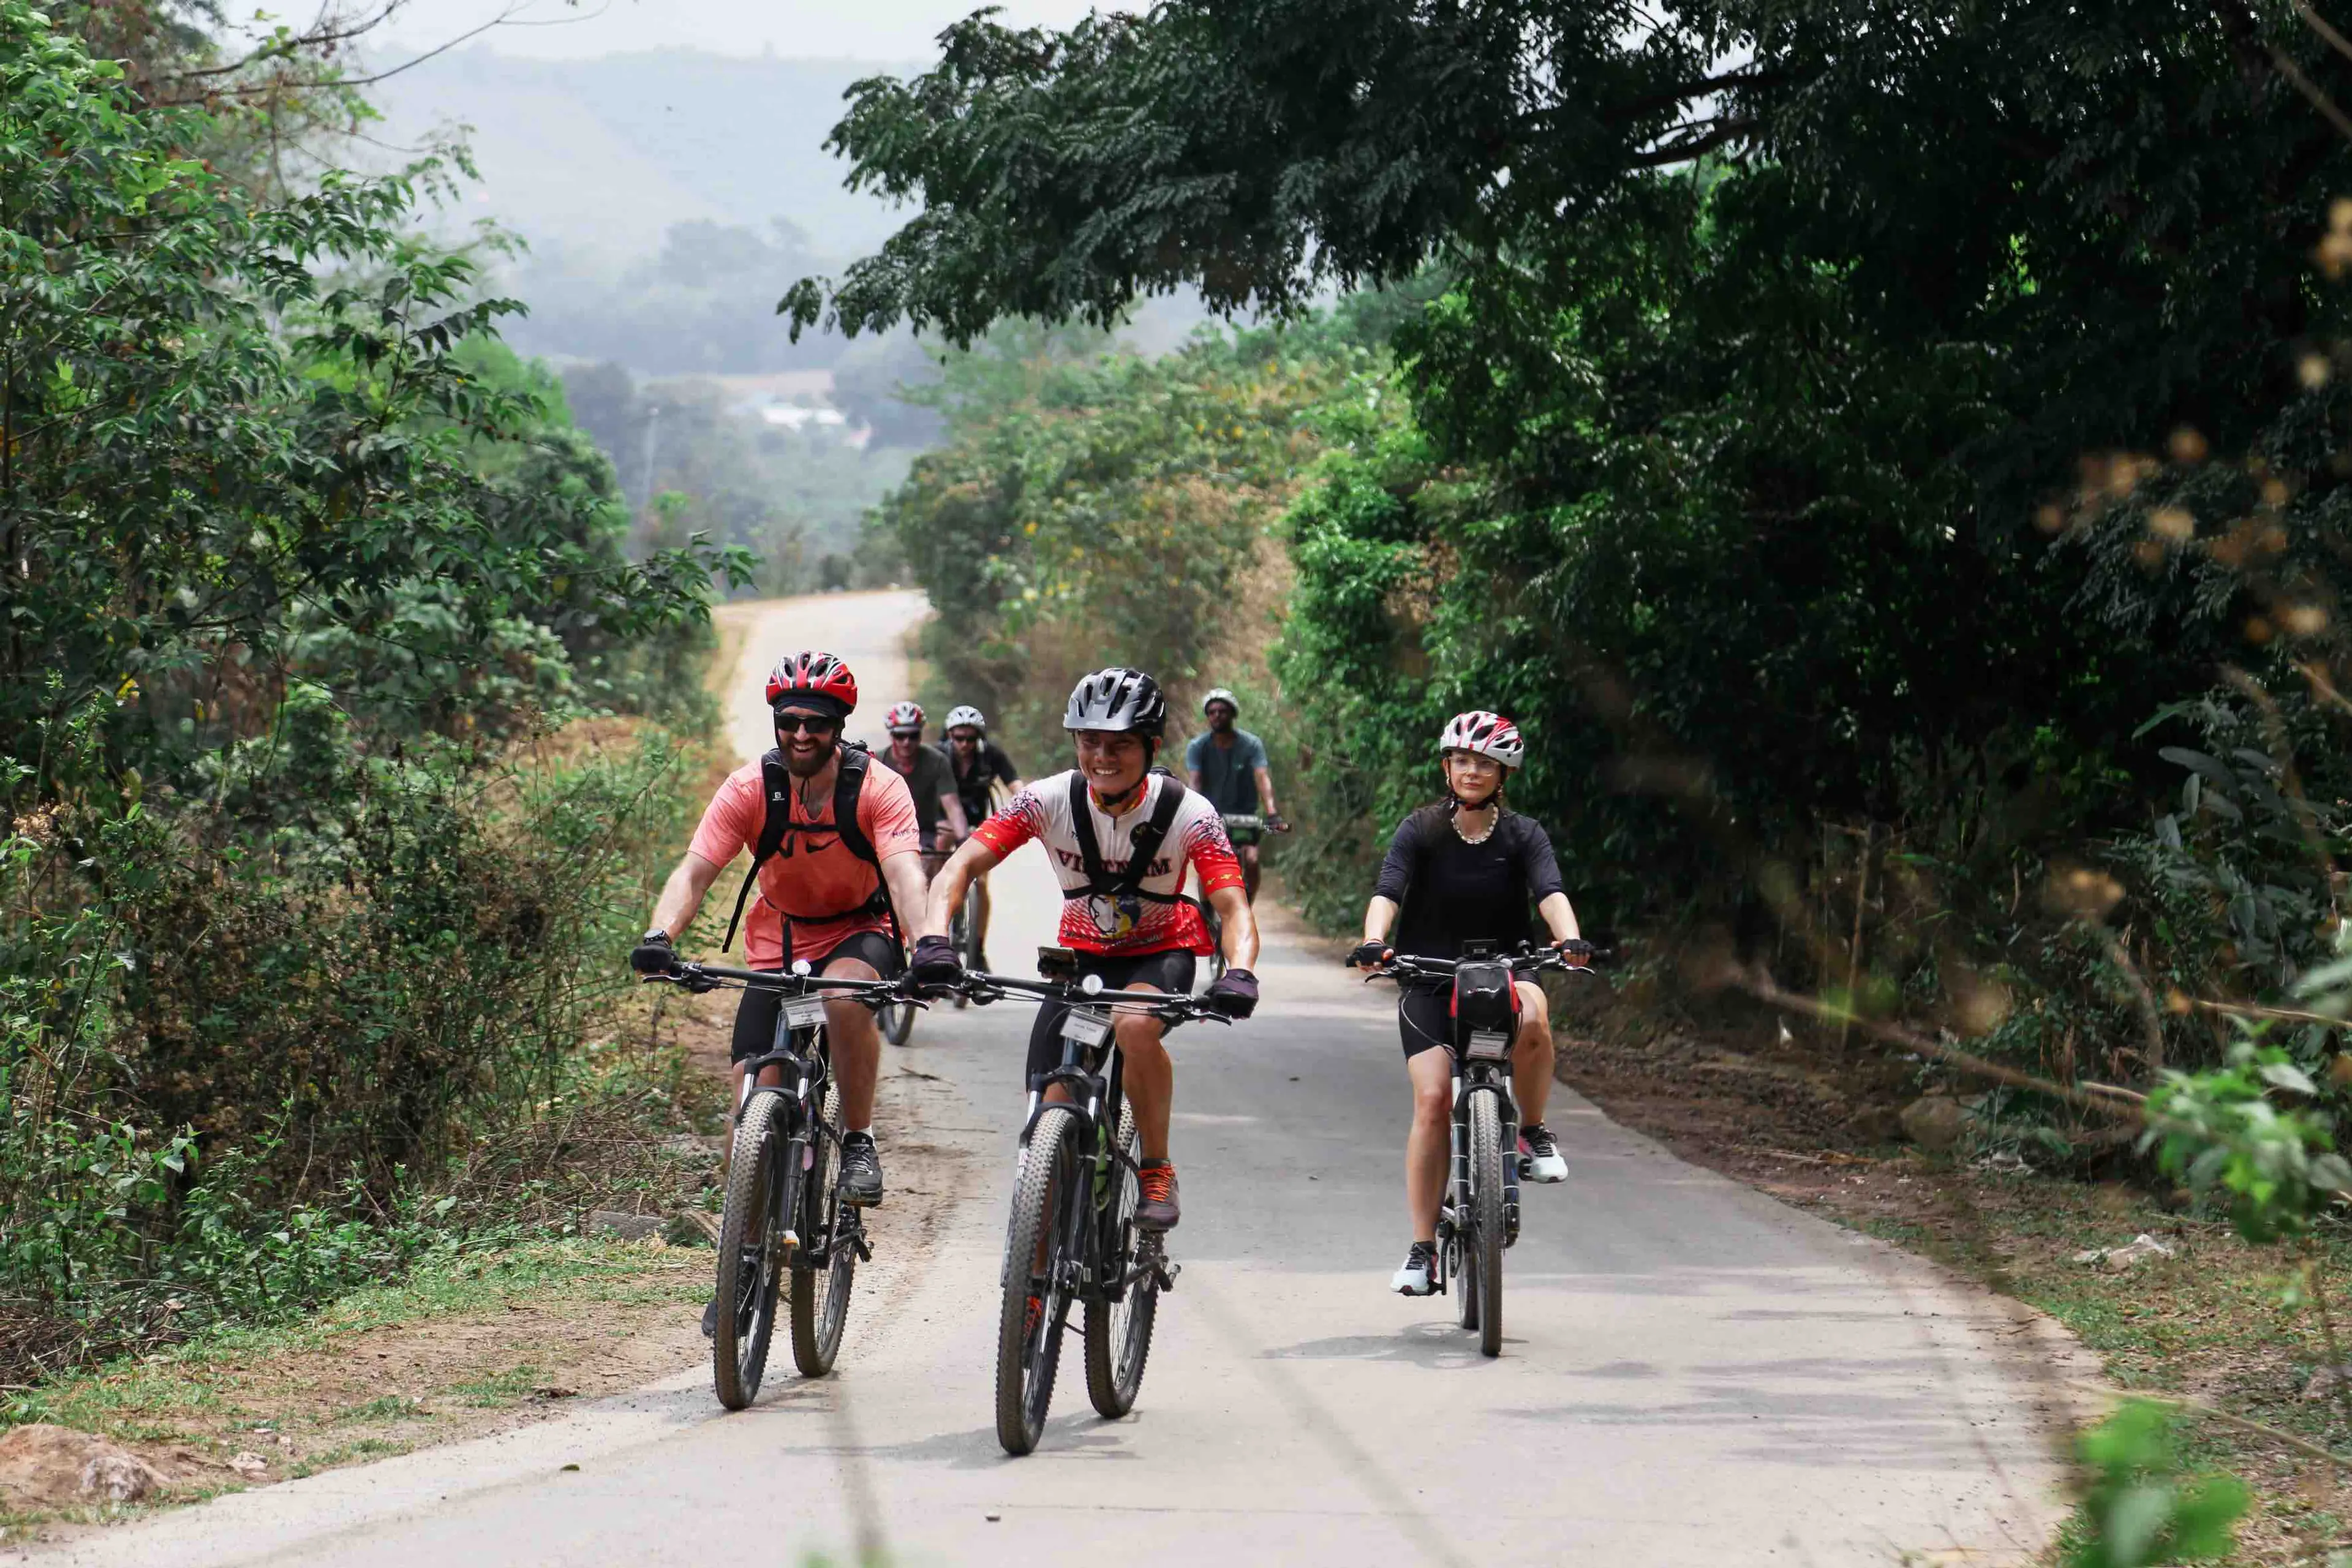 Our most featured biking route in the Northern of Vietnam